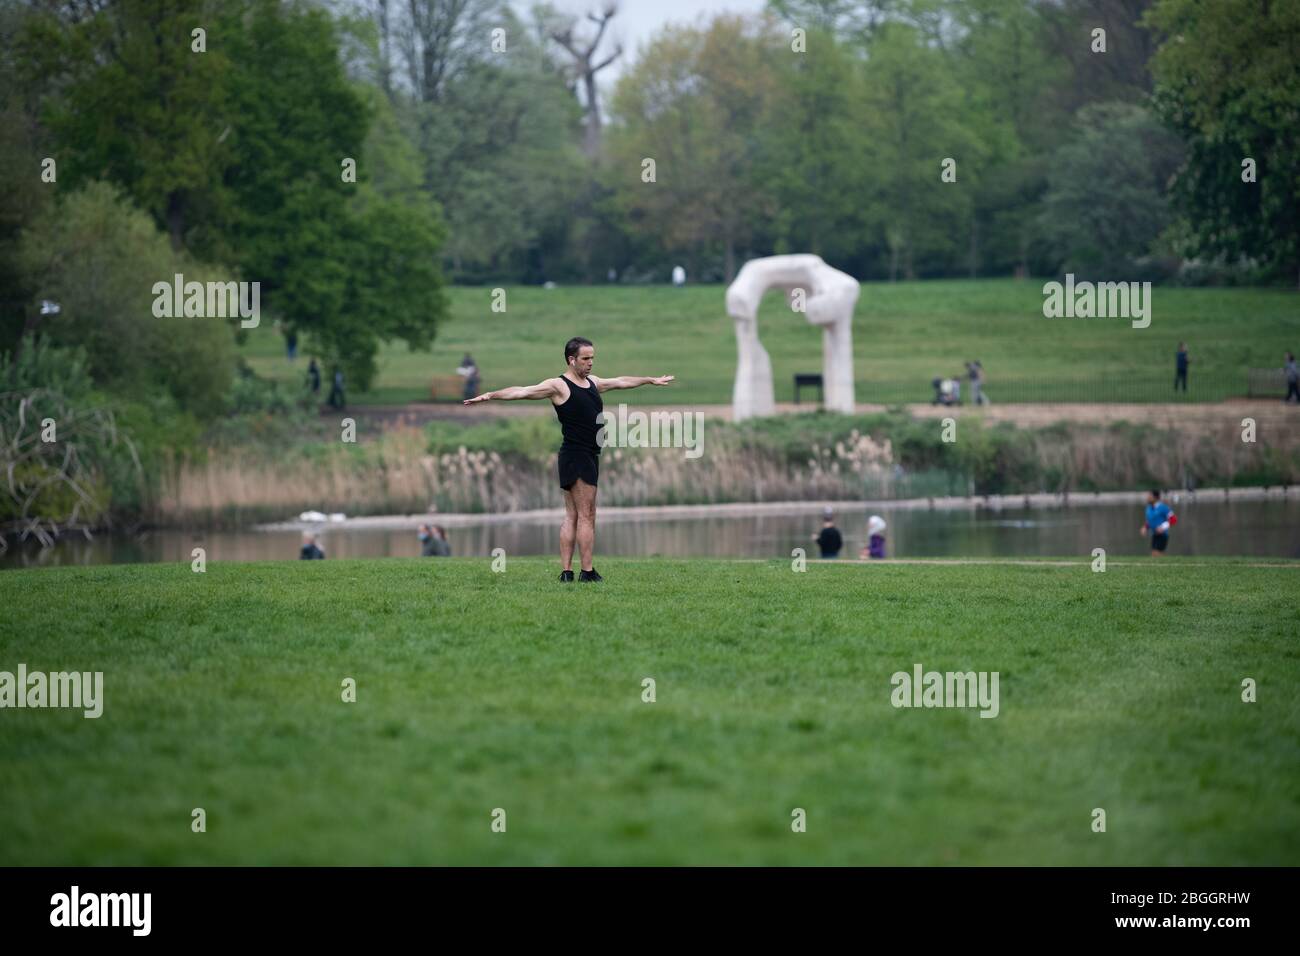 Man exercising in Kensington Gardens, London during lockdown as his daily exercise allowance, Henry Moore sculpture in the background. Stock Photo